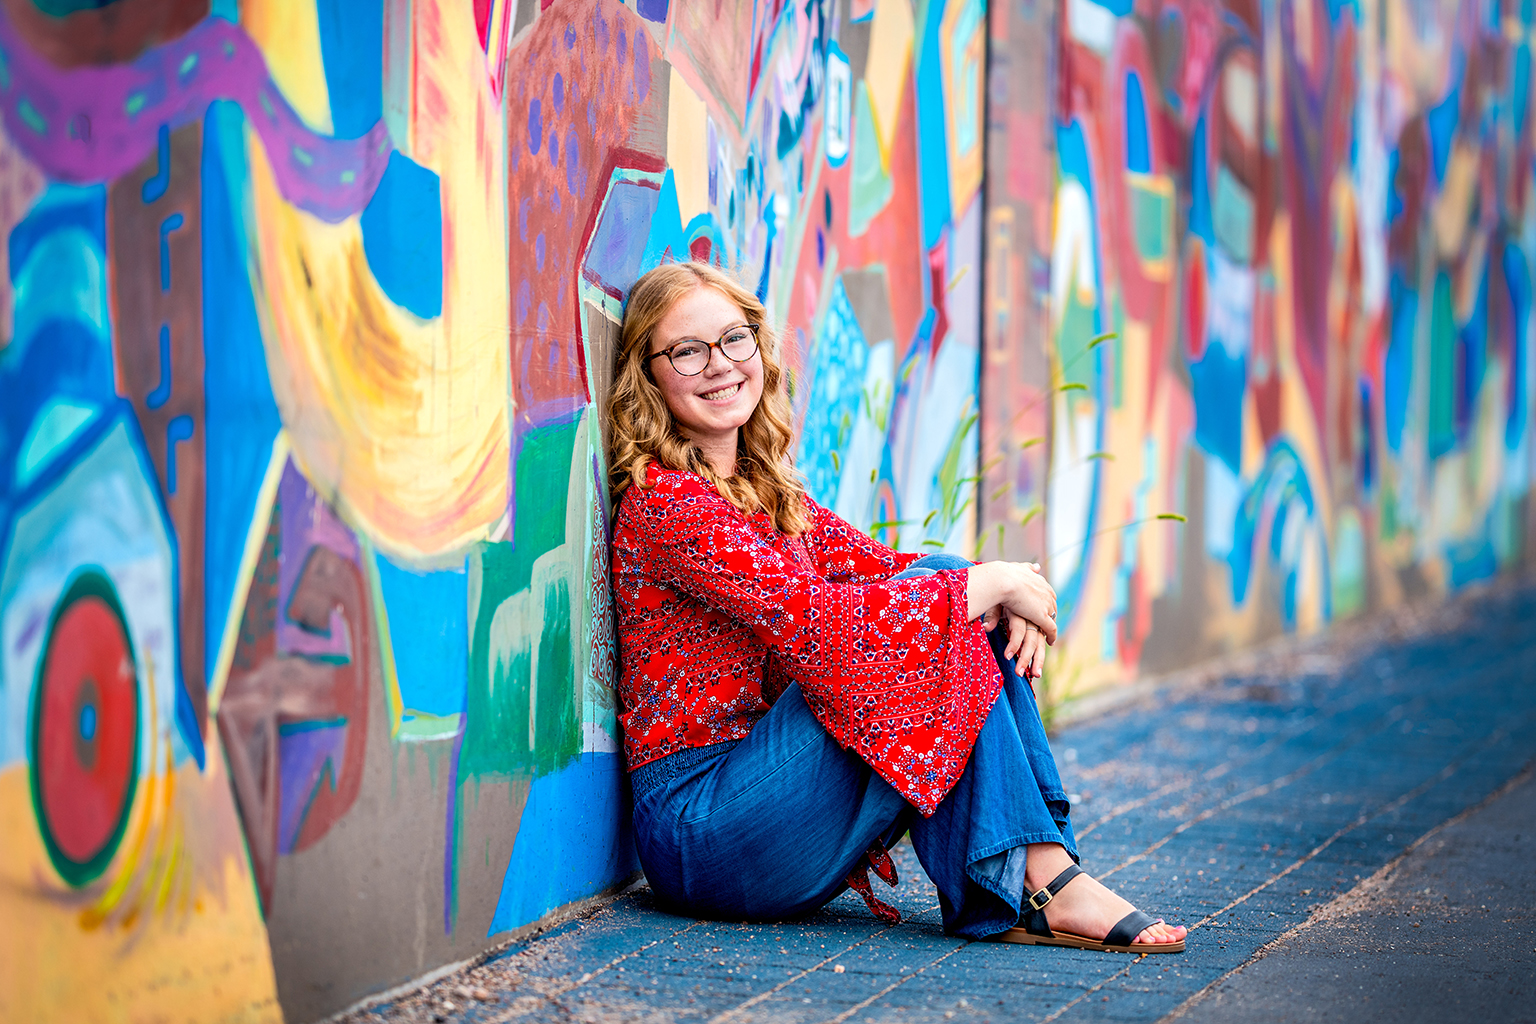 A young woman sitting against a graffiti wall.